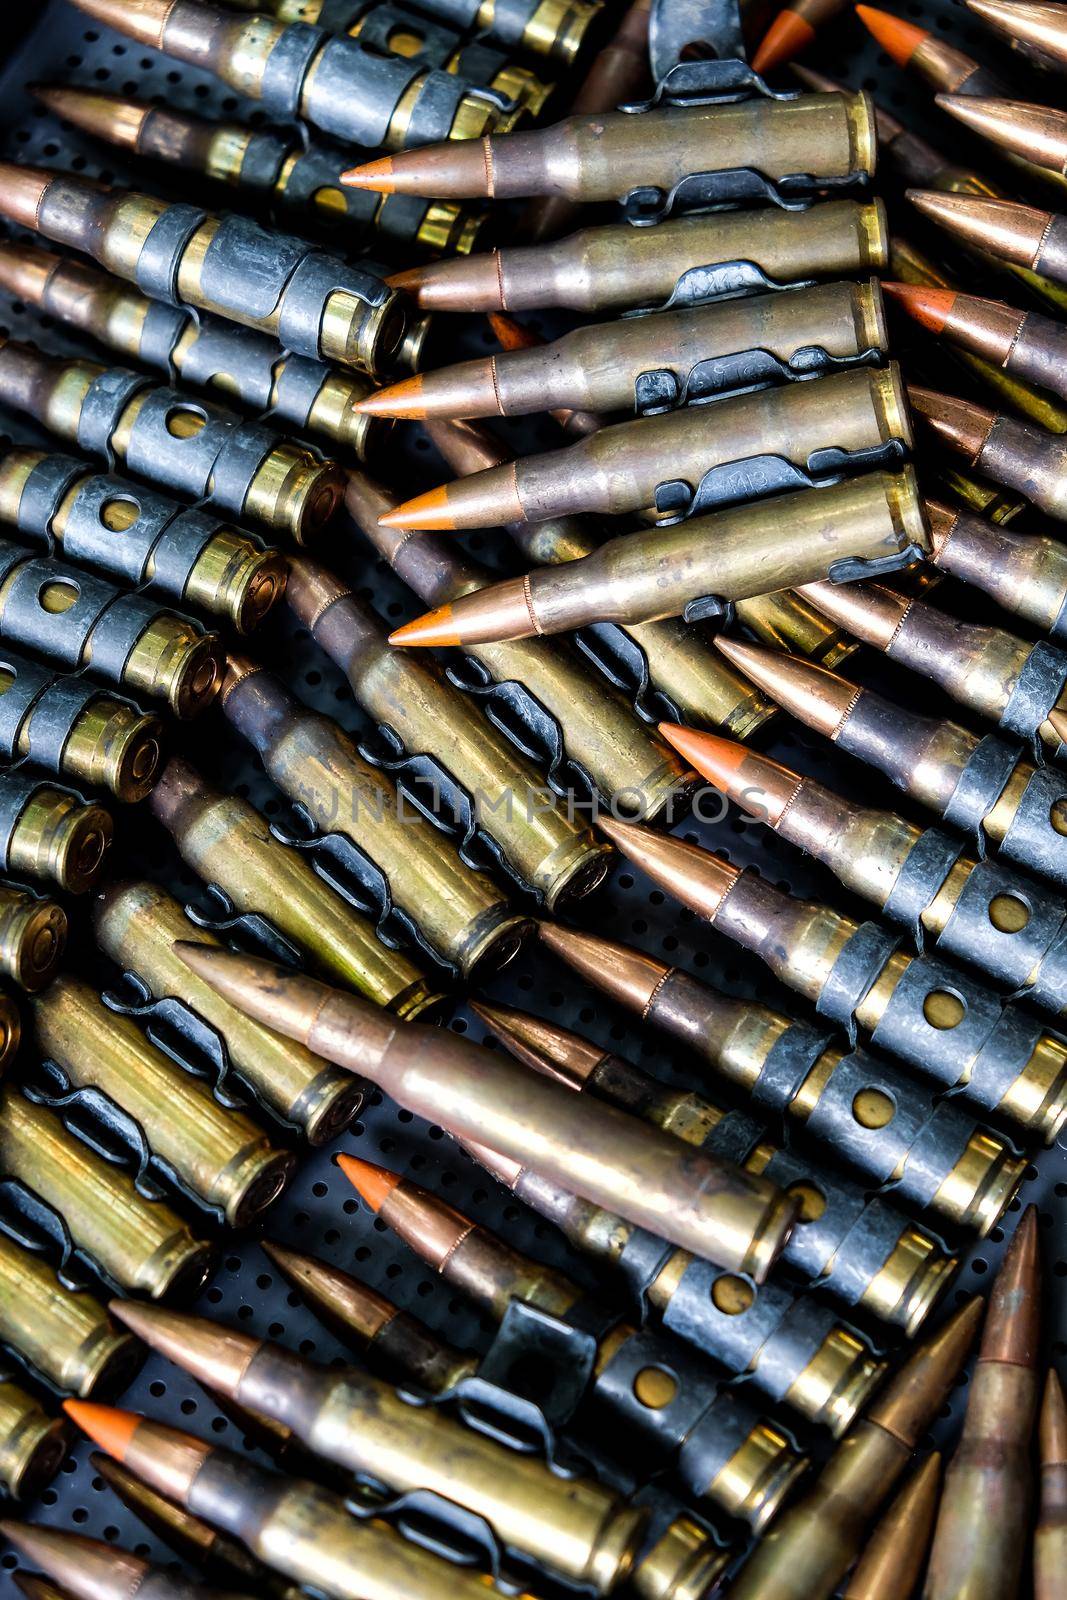 Rifle Bullets by ponsulak